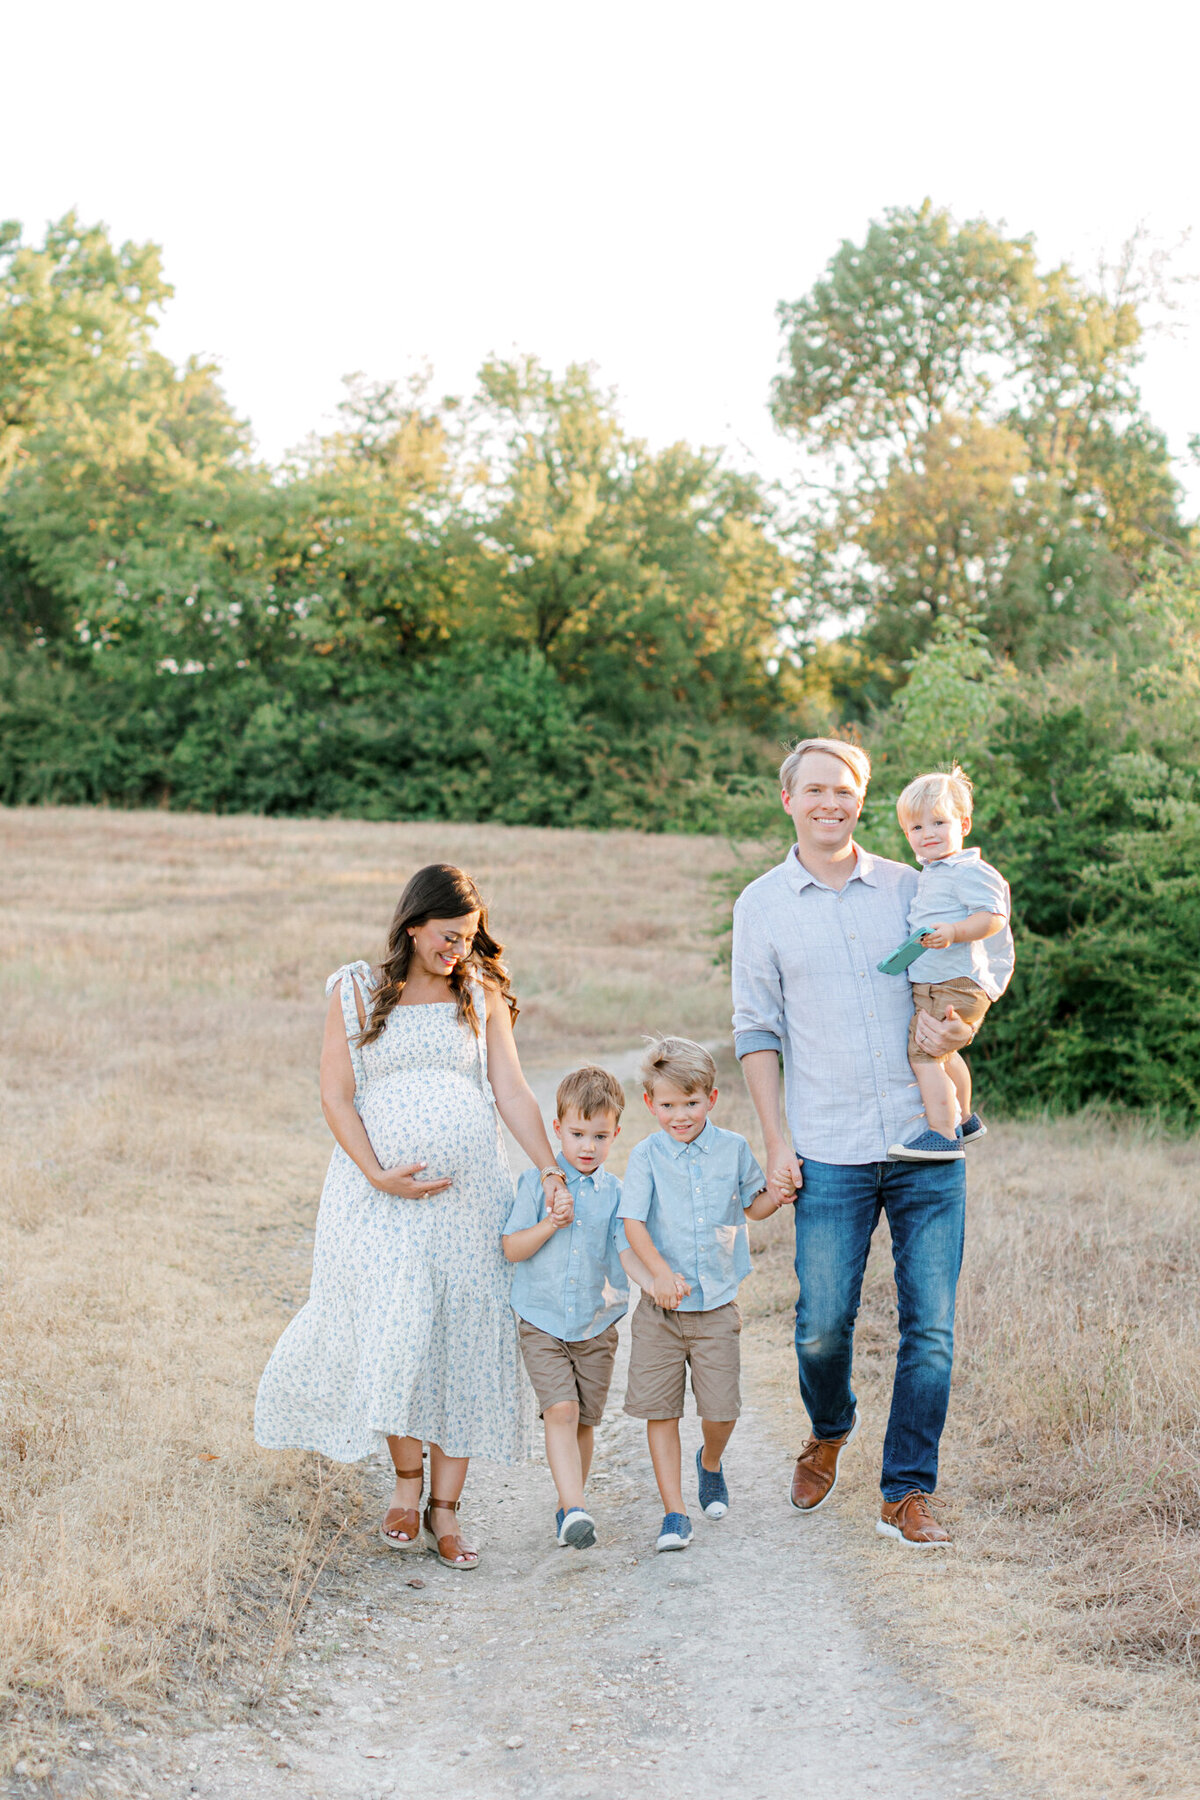 Driver Family Maternity Session | Dallas Family Photographer | Sami Kathryn Photography-32